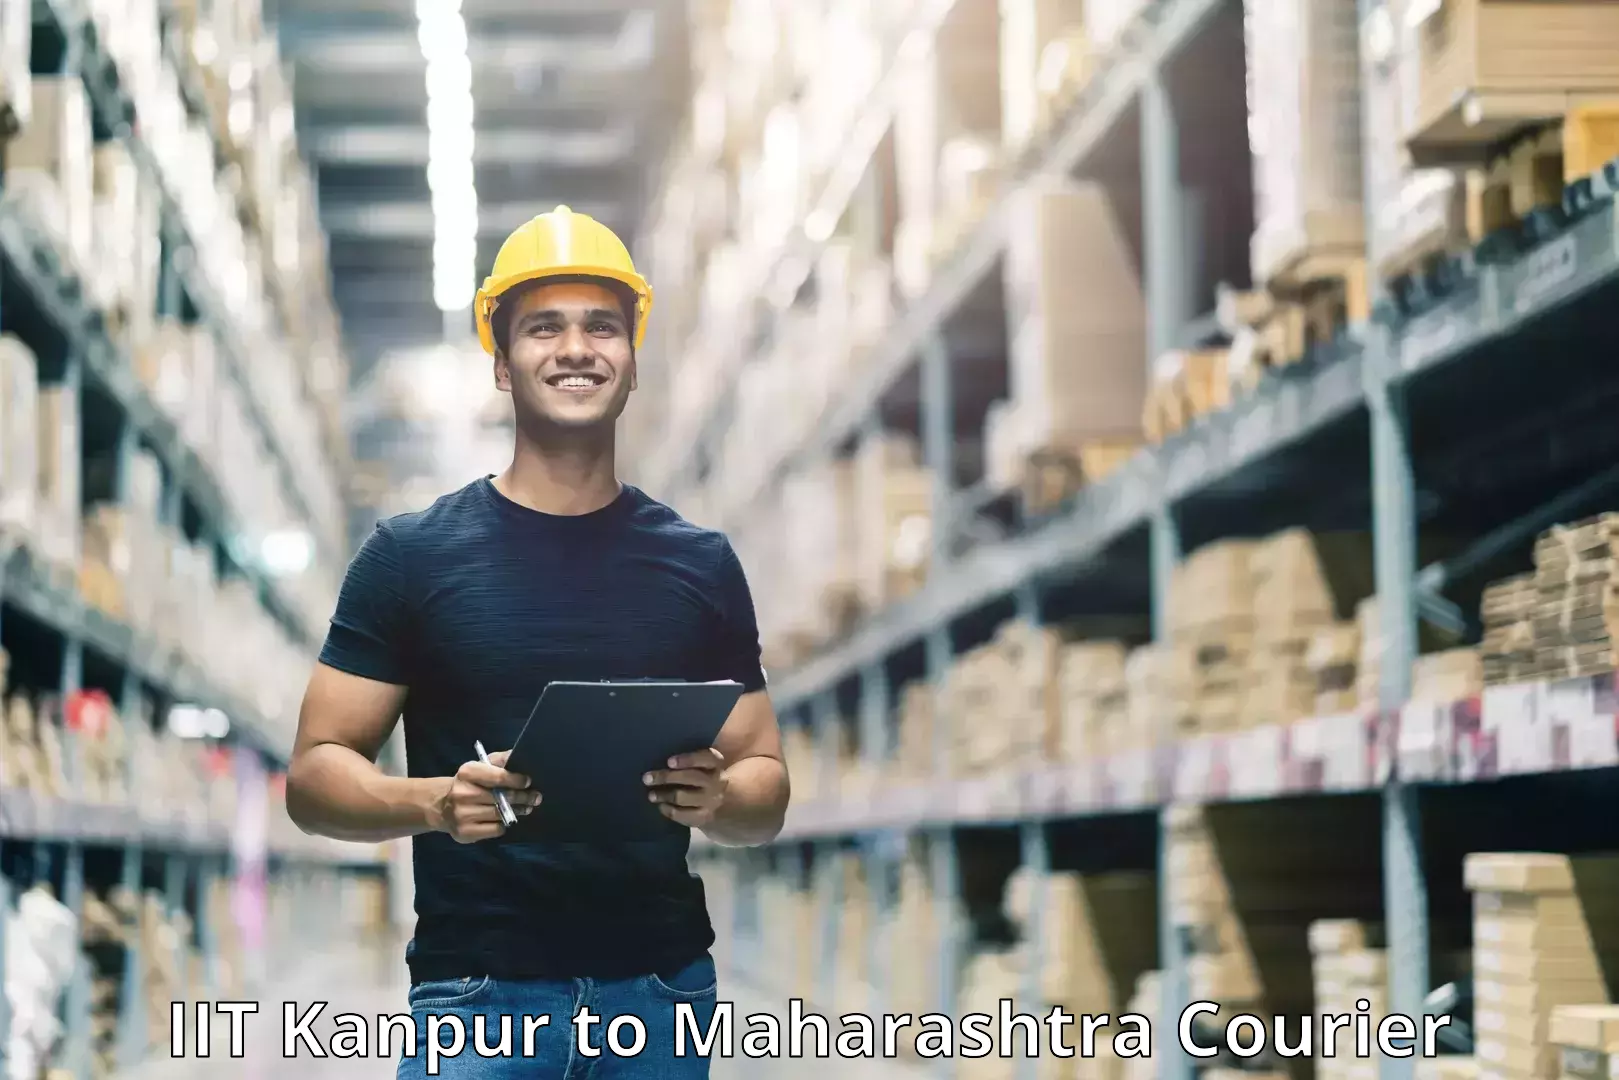 Bulk courier orders IIT Kanpur to Ambarnath